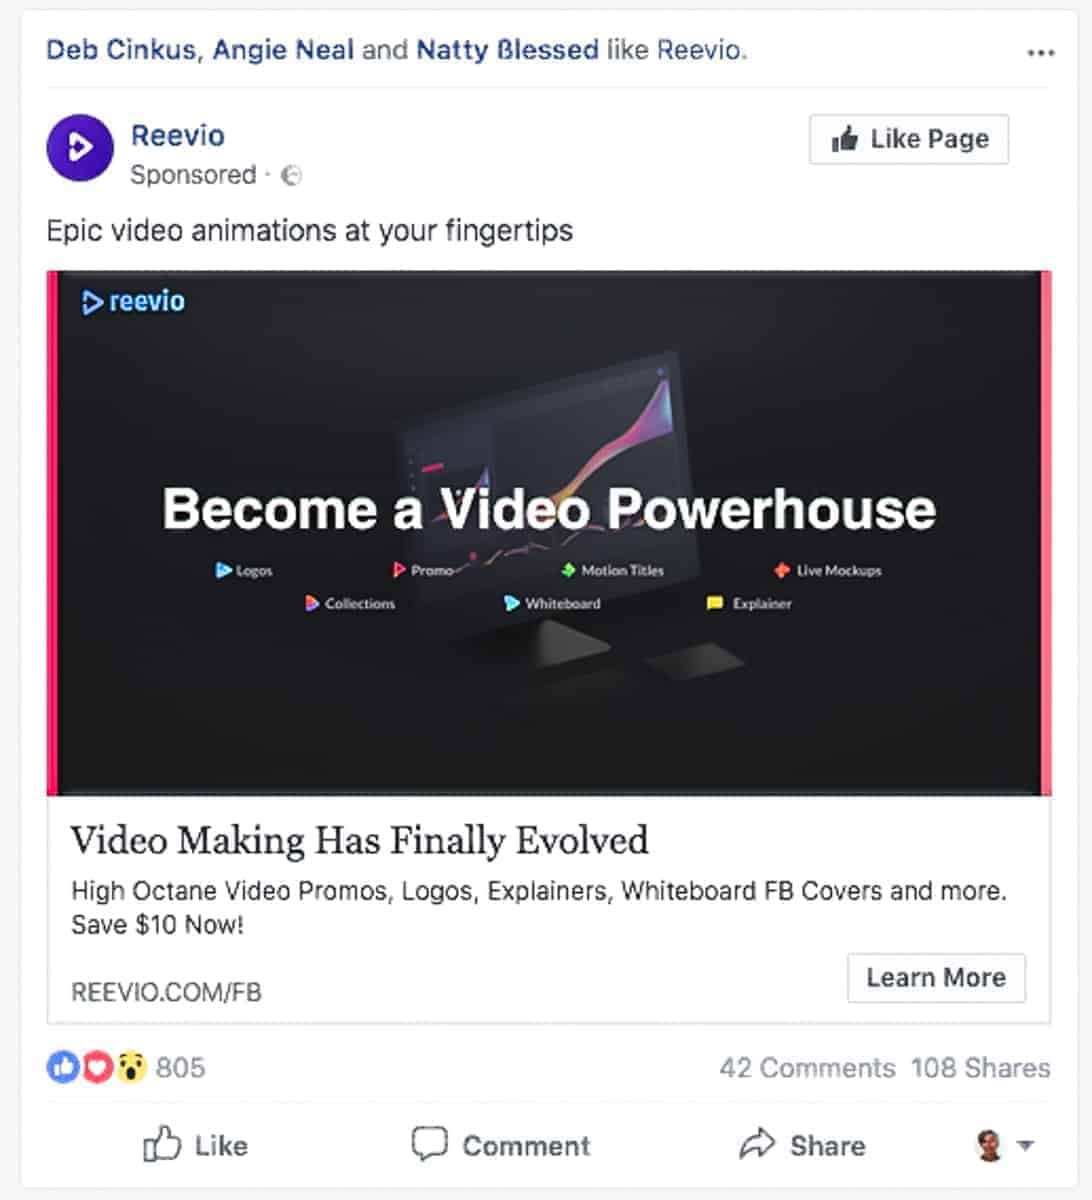 A sponsored Facebook post with information placed in clearly delineated areas, exemplifying the Gestalt principle of Common Region. The application of simple principles of Gestalt psychology for web design can greatly enhance the user experience and interface of the websites we design.